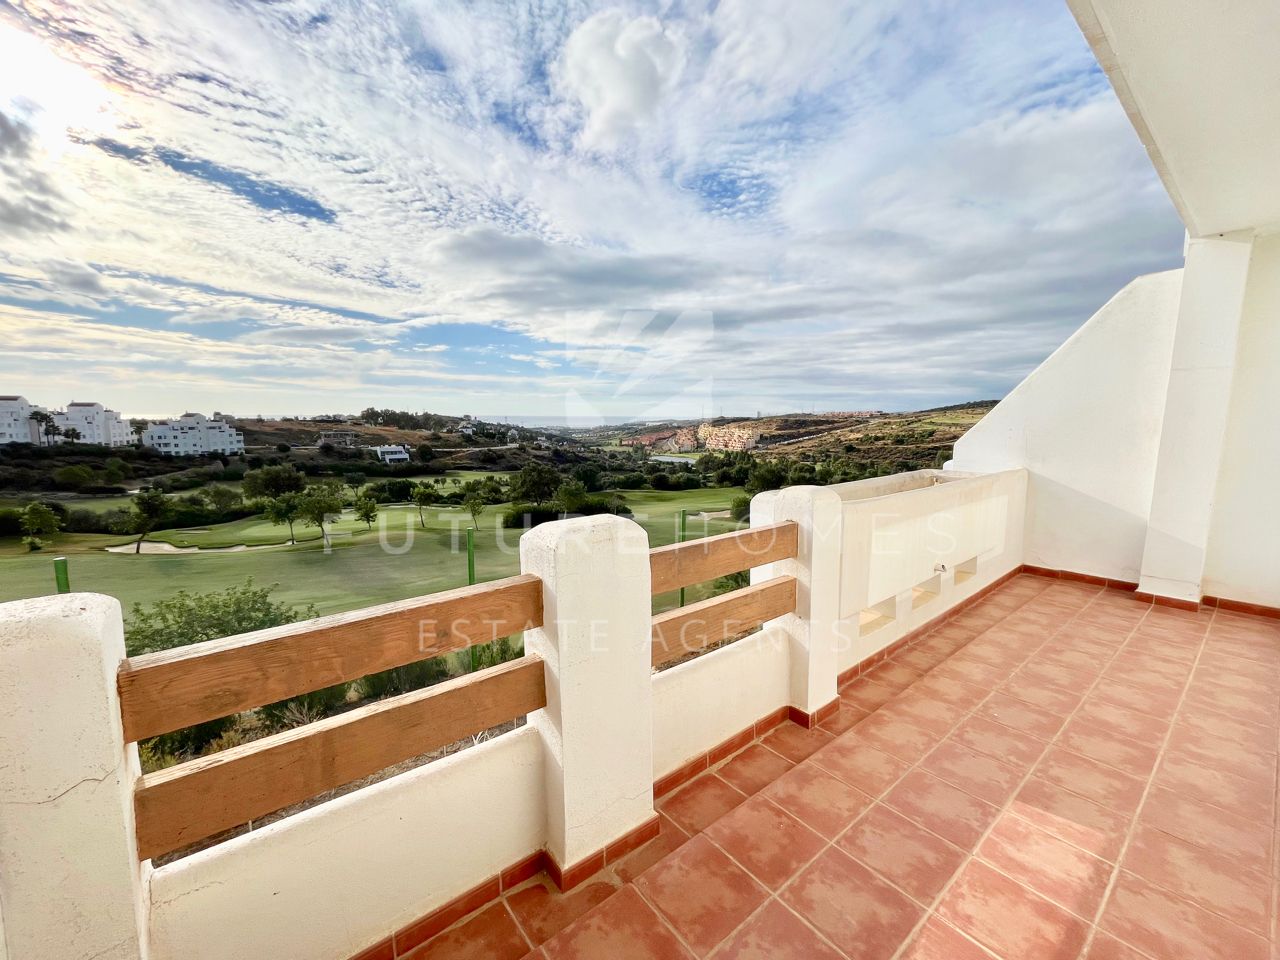 Frontline golf apartment with open views located in Valle Romano, Estepona